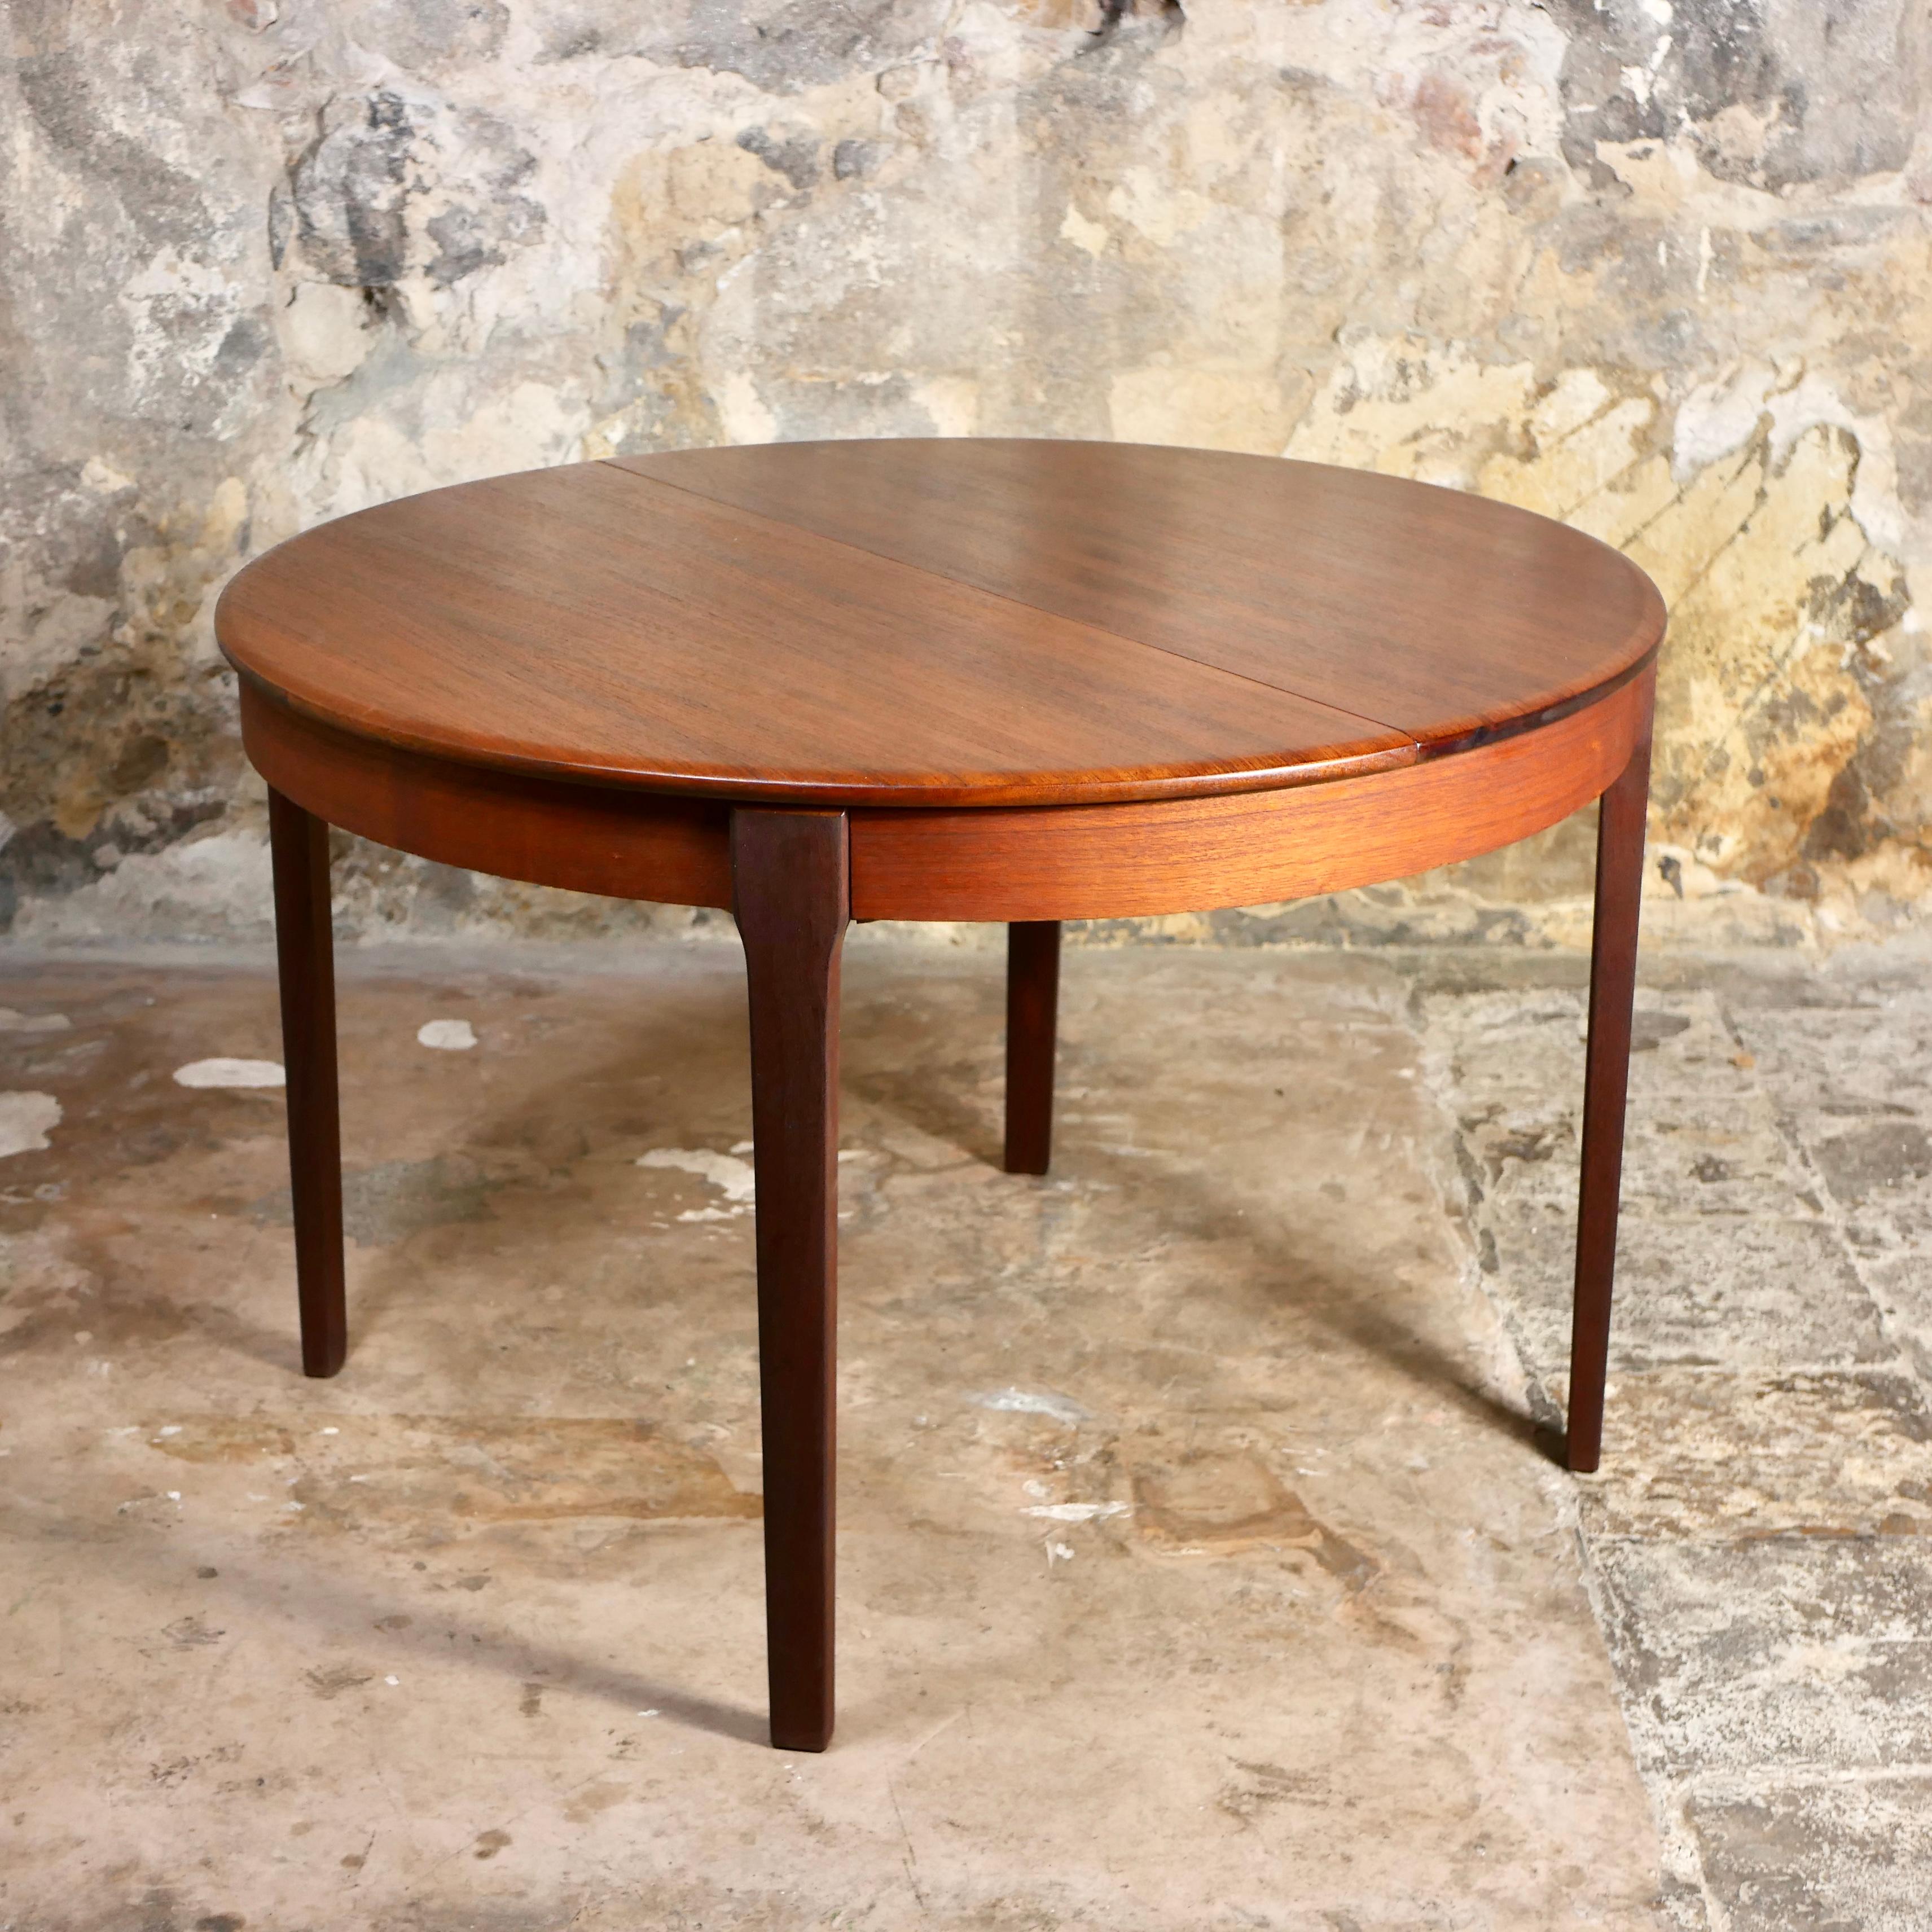 Expandable teak table, scandinavian style, made in the 1960s in France.
Butterfly extension system (4-6 persons), and great making details, like these beautiful rounded edges which perfectely reflet the light.
Good condition, has been sanded and